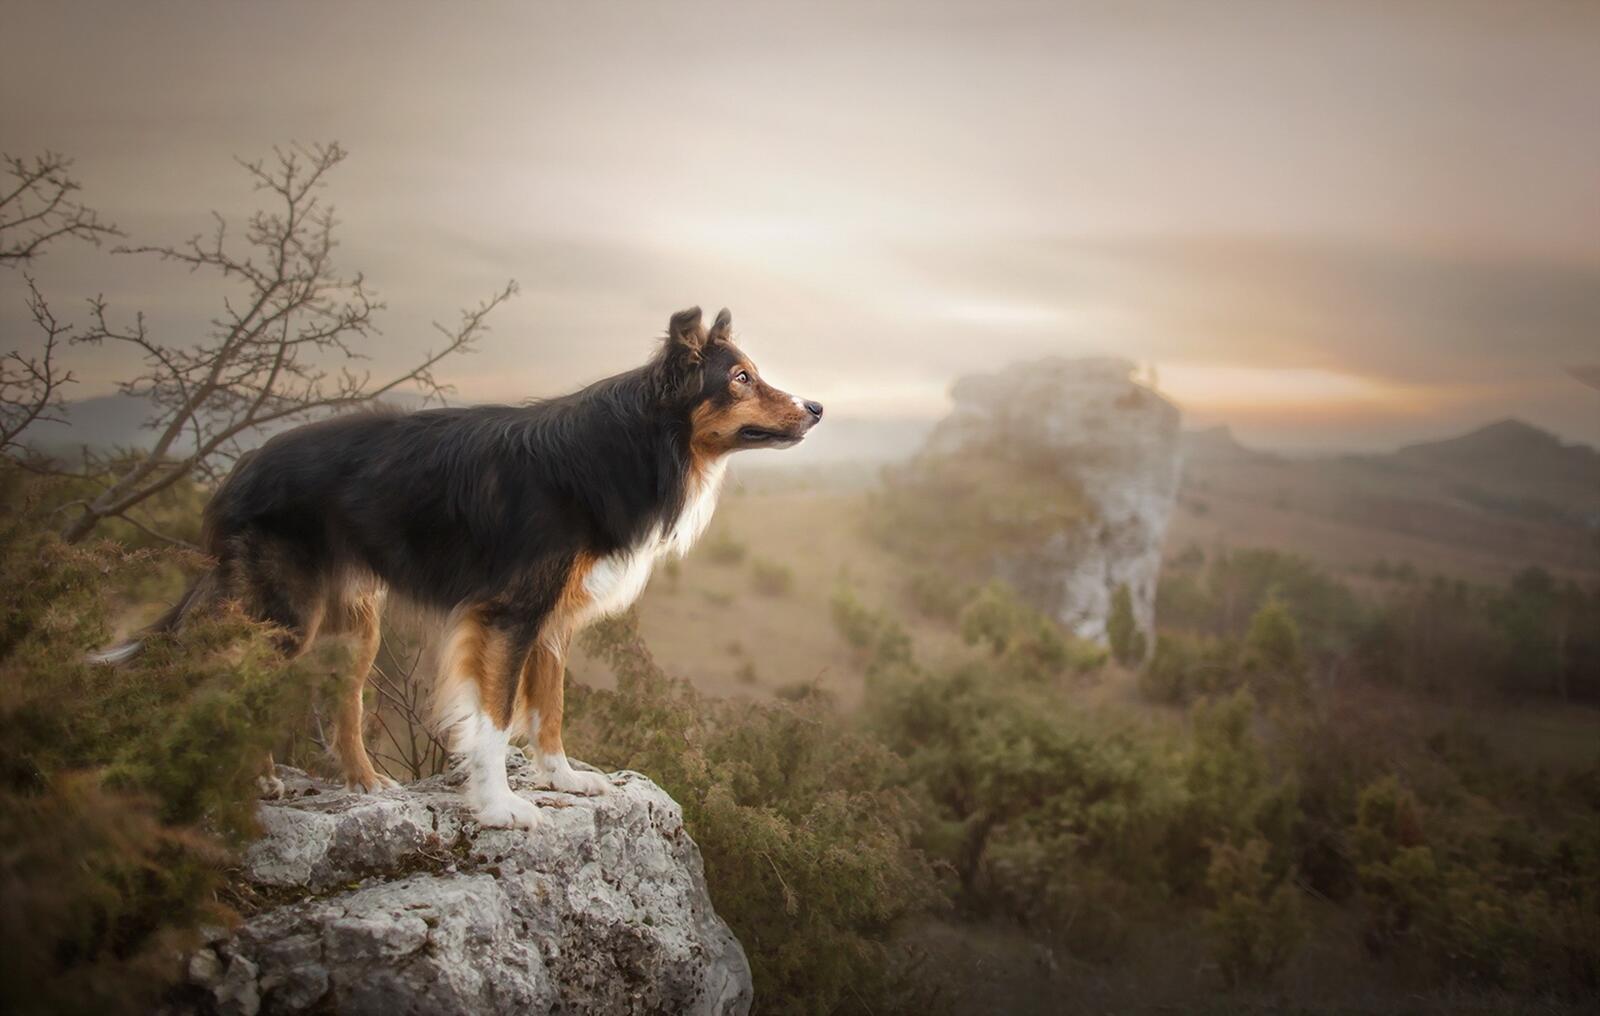 Wallpapers dog looking into the distance landscape on the desktop